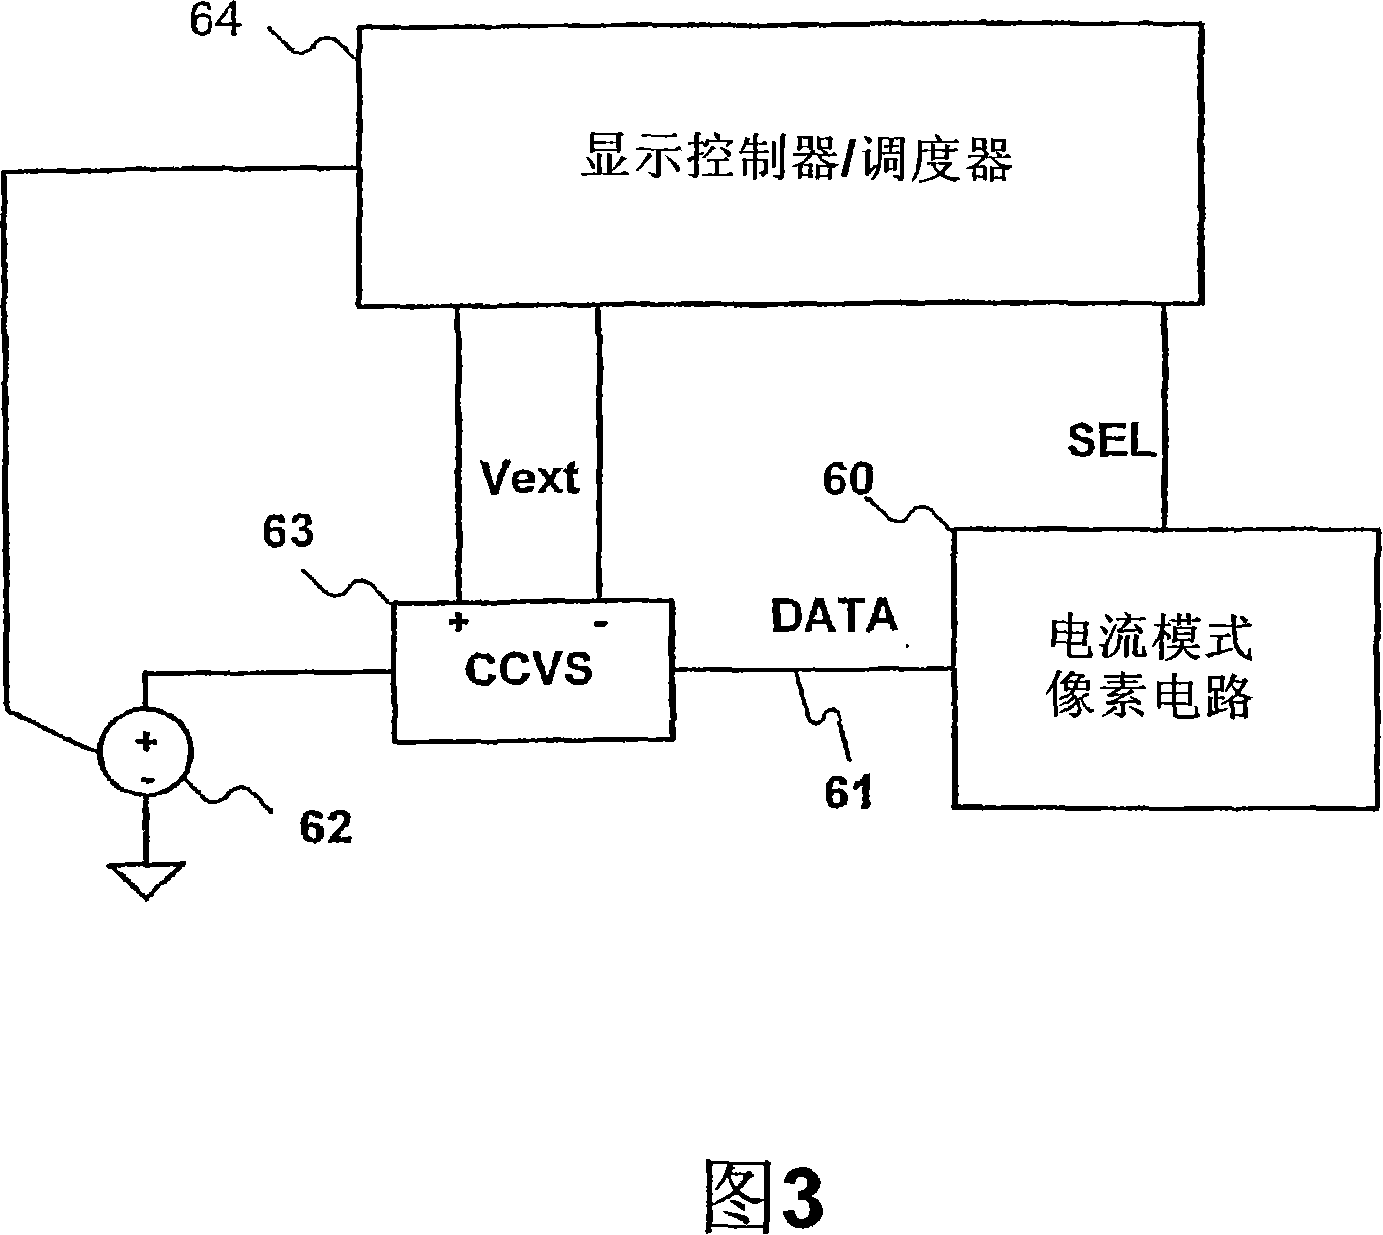 Method and system for programming, calibrating and driving a light emitting device display